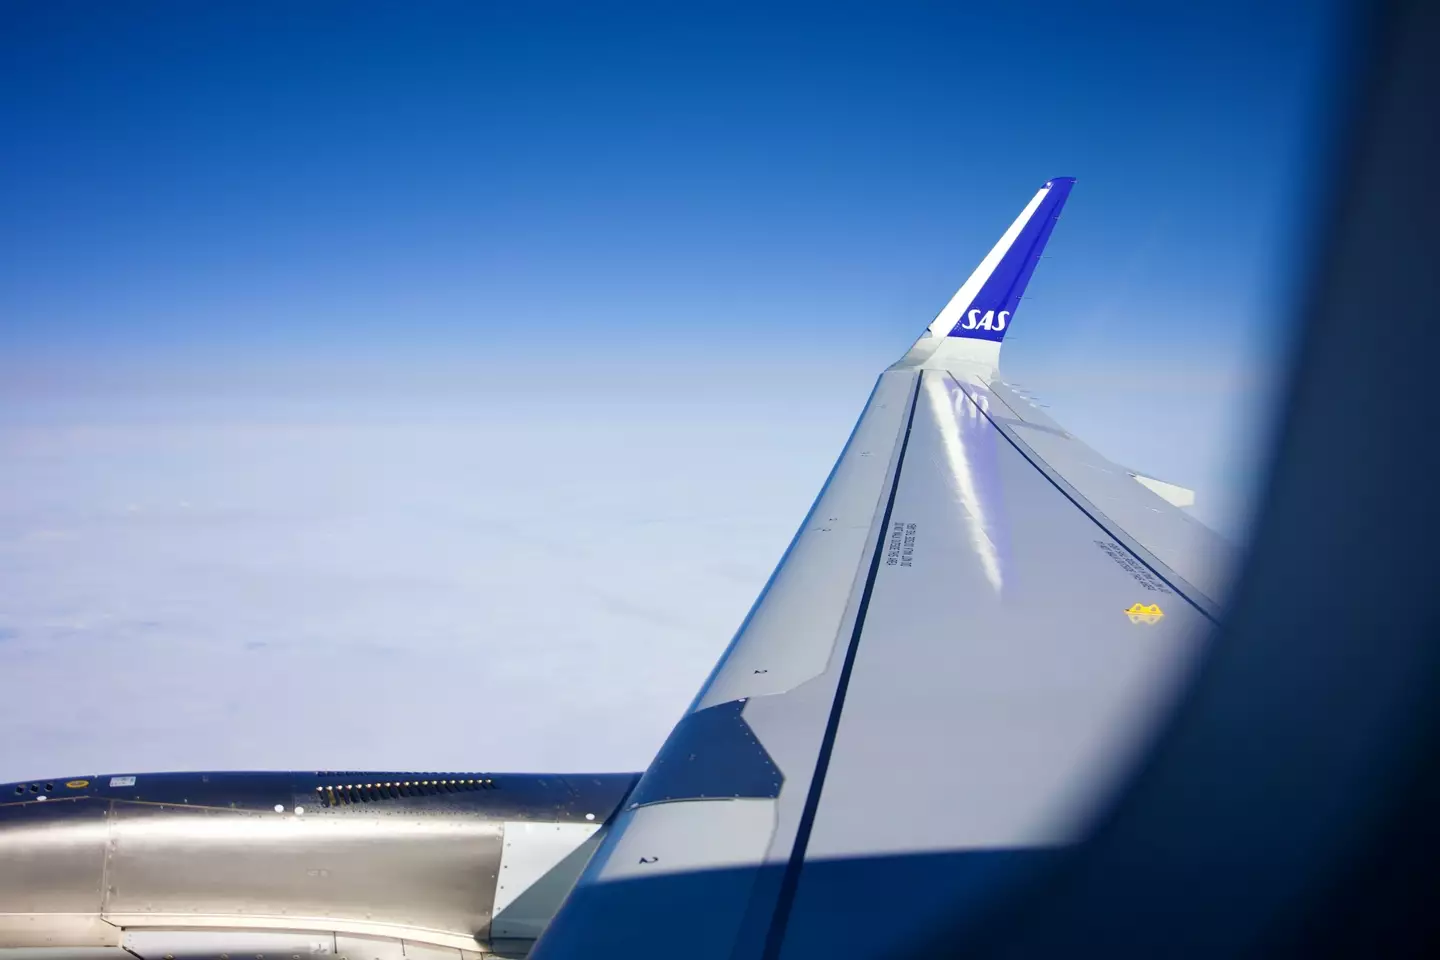 The man claims to have no idea how he ended up on the Scandinavian Airlines flight.